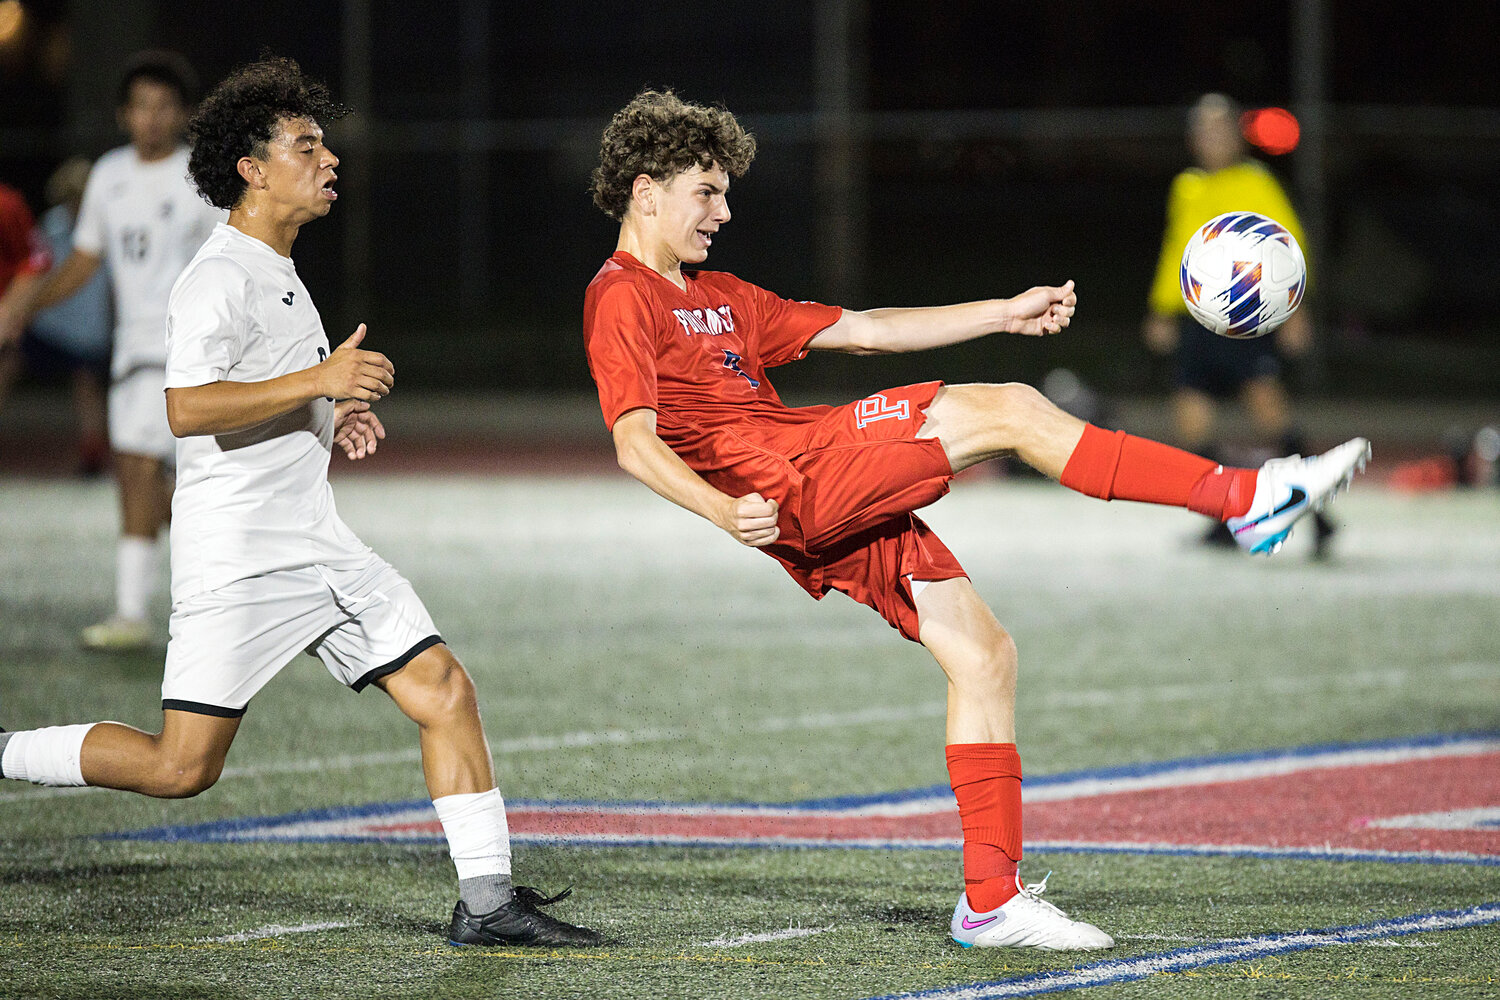 Midfielder Kyle Bielawa sends a pass over his and his opponent’s head.